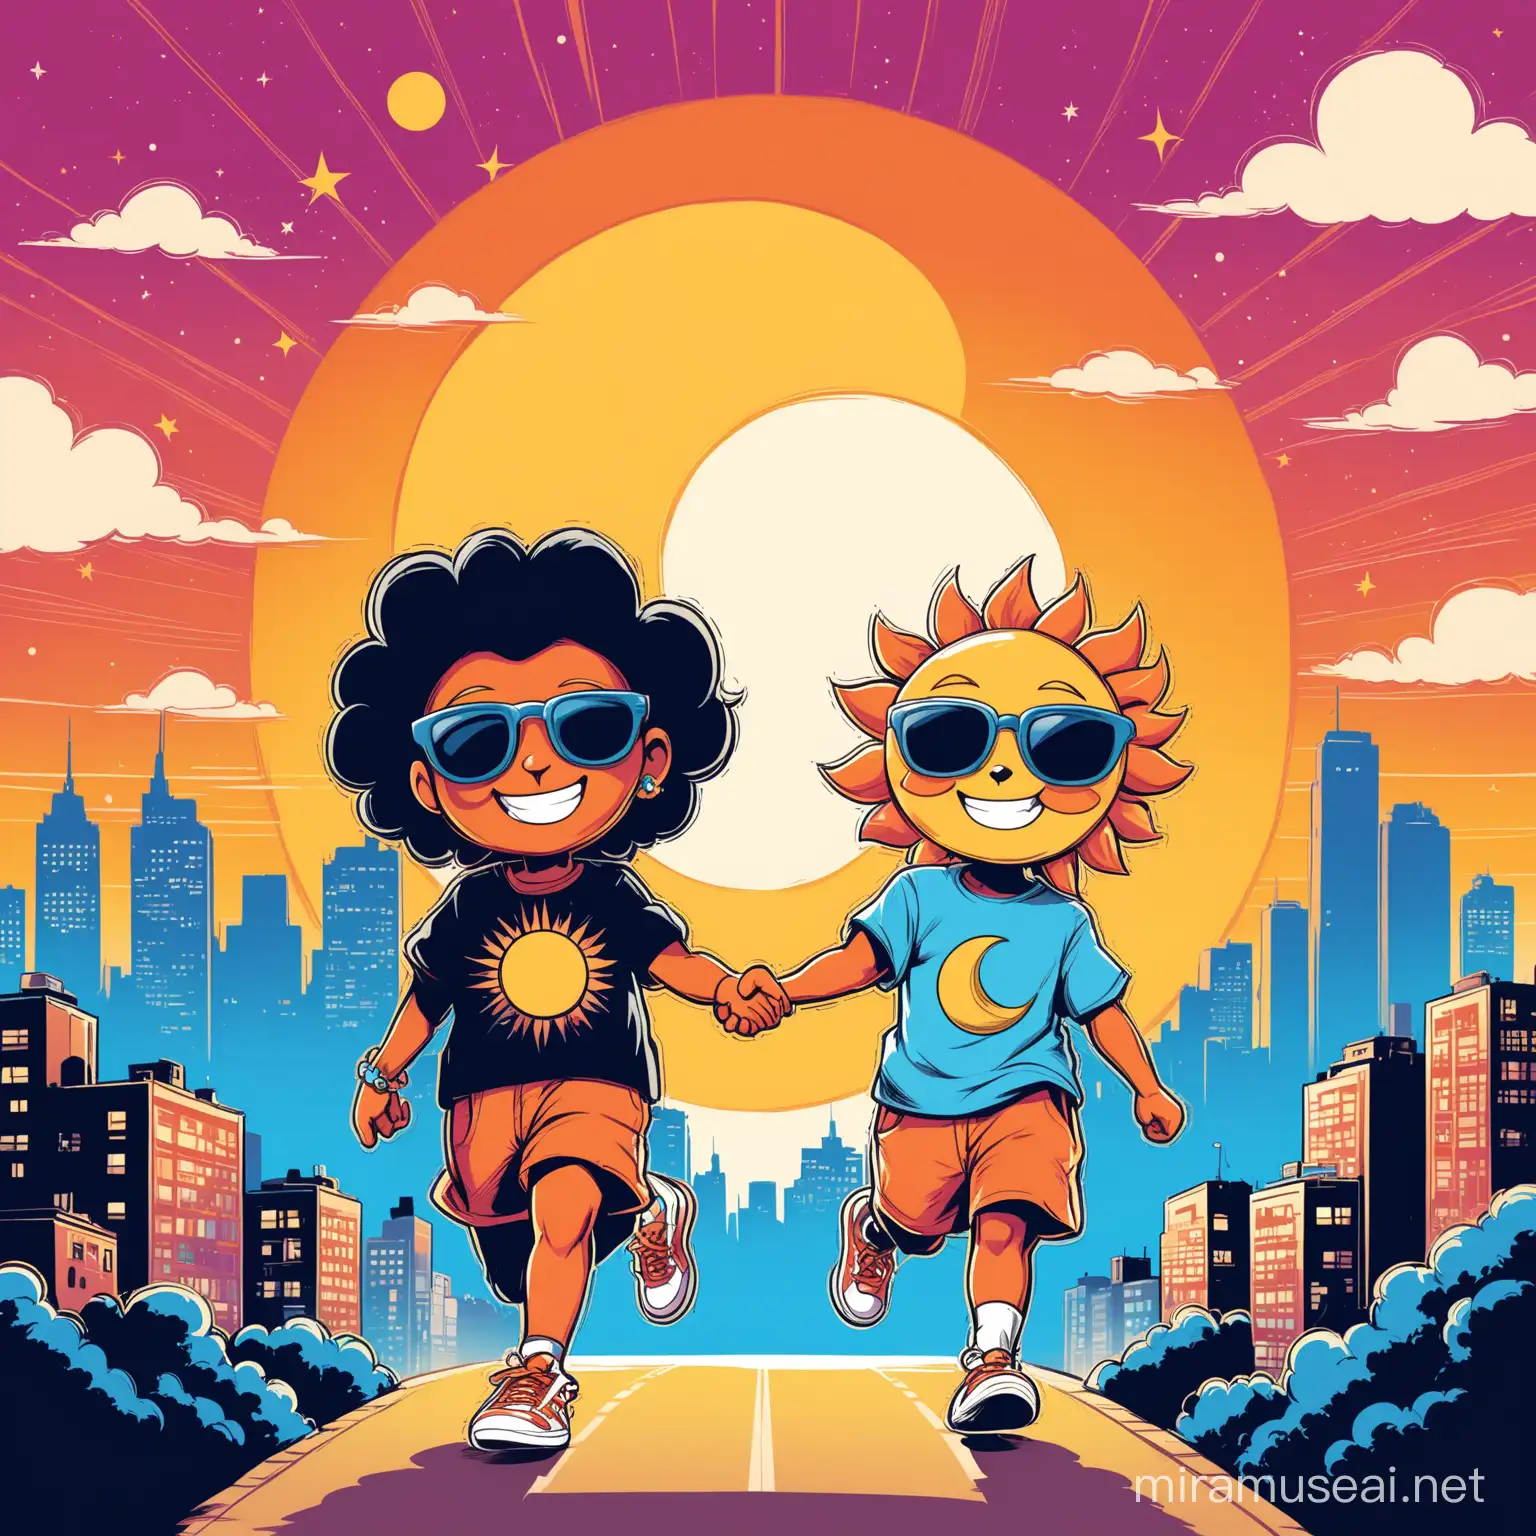 A charming retro-inspired illustration of a groovy sun and moon mascot, wearing stylish sneakers and walking together. The sun sports a cheerful smile and a pair of cool sunglasses, while the moon is a little more mysterious, with a crescent smile. The background is a vibrant, nostalgic scene with a city skyline, puffy clouds, and a setting sun. For t-shirt design